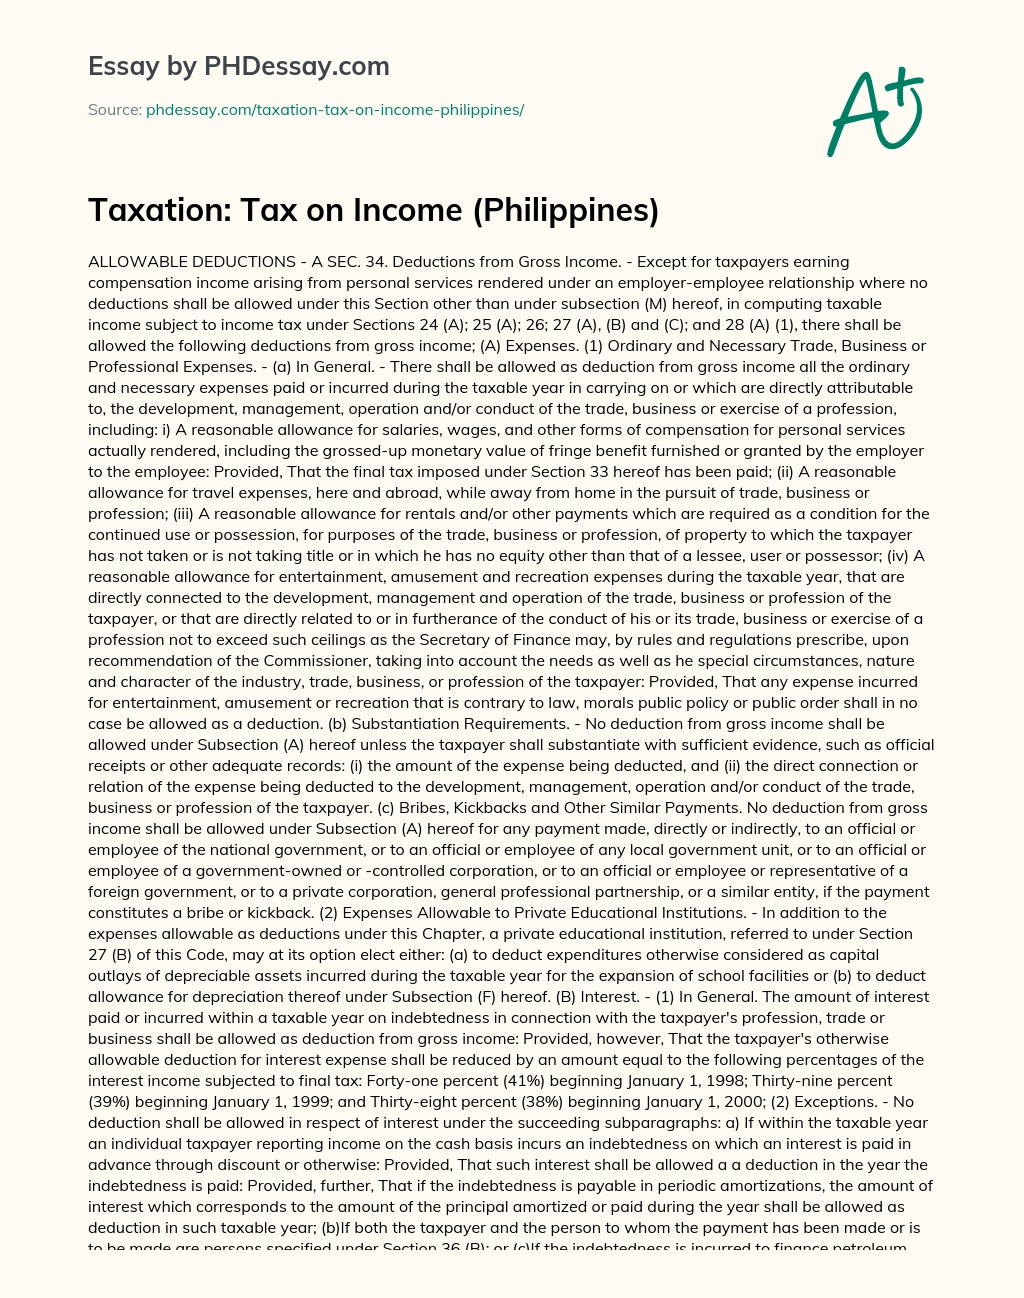 Taxation: Tax on Income (Philippines) essay